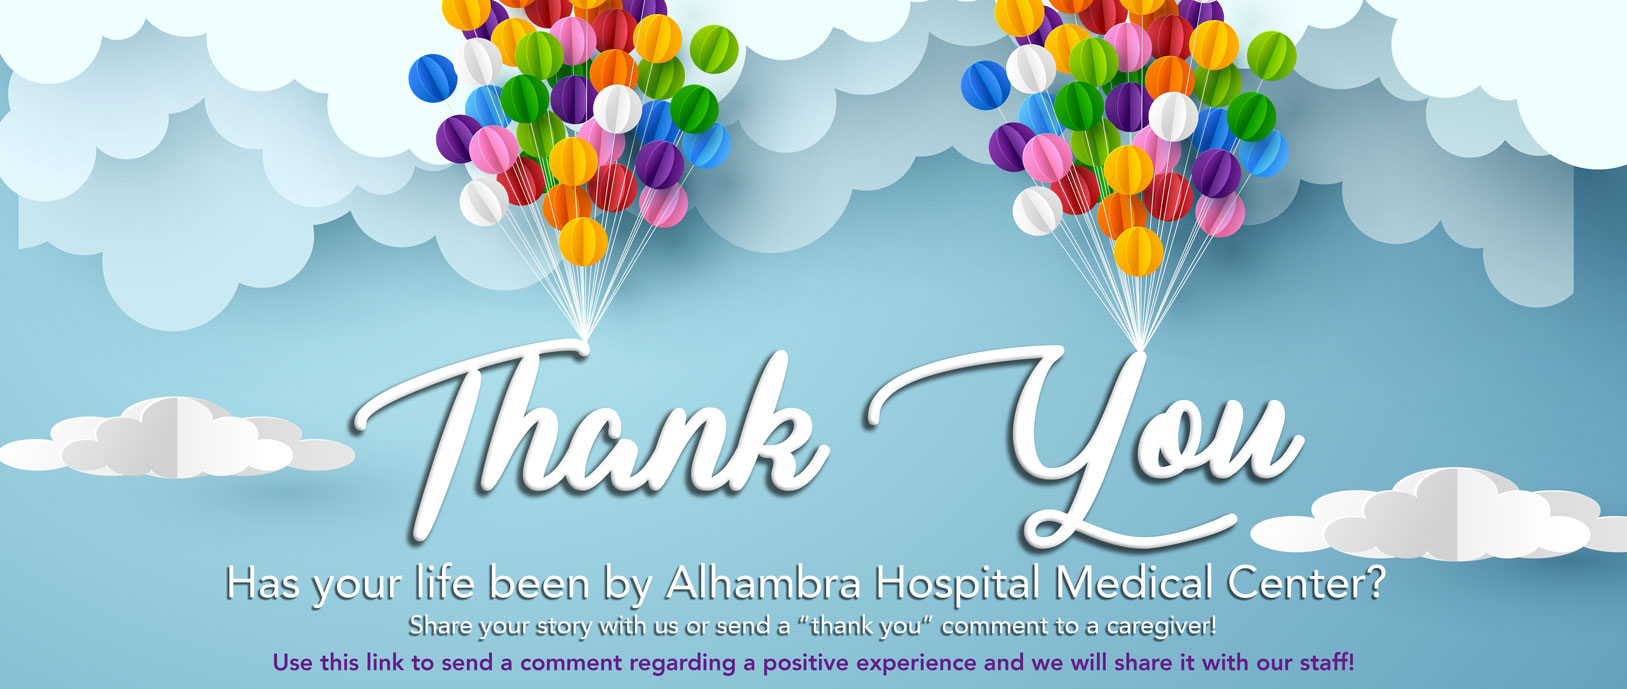 Has your life been by Alhambra Hospital Medical Center? Share your story with us or send a thank you comment to a caregiver! Use this link to send a comment regarding a positive experience and we will share it with our staff!